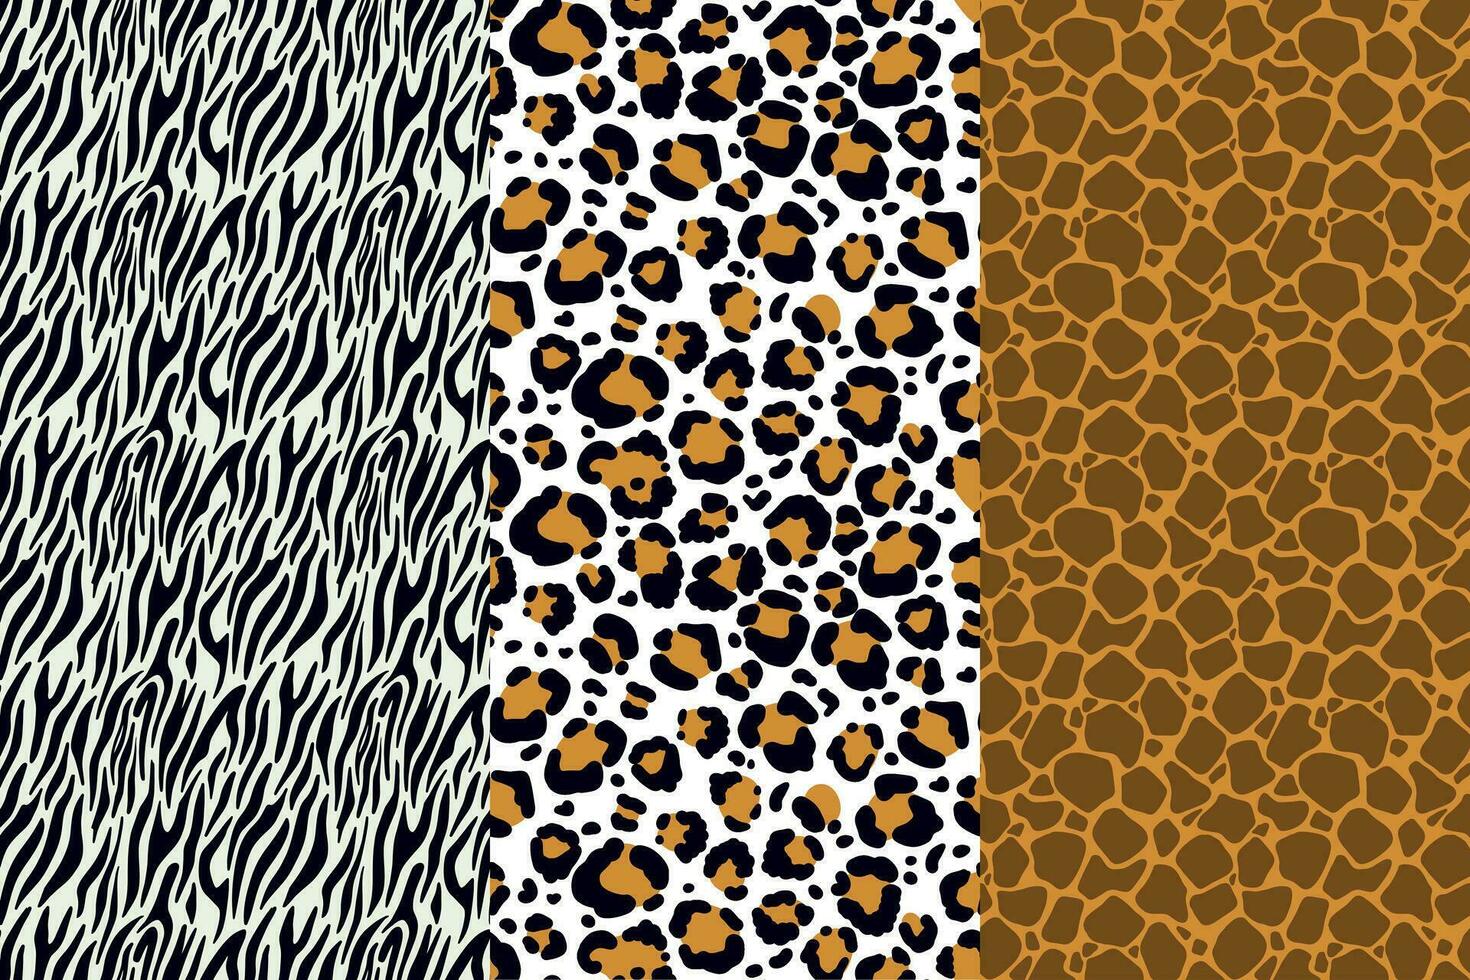 Vector illustration set of animal seamless prints. Tiger and leopard patterns collection in different colors in flat style.